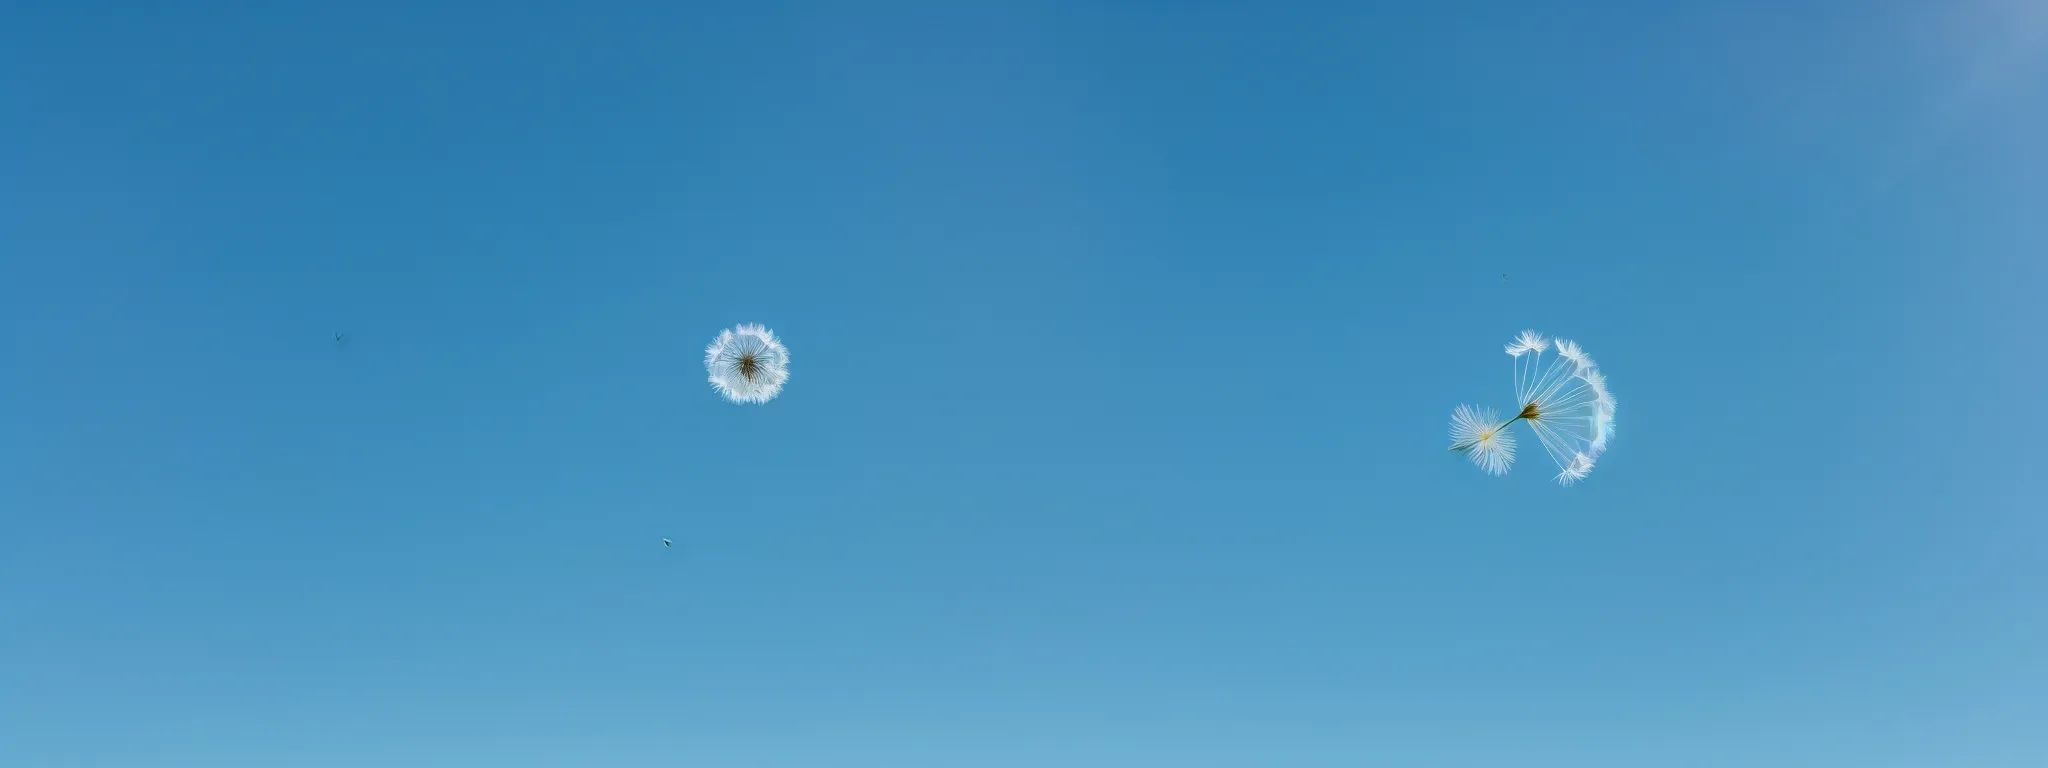 a lone dandelion seed flying against a vast, clear blue sky, symbolizing growth and potential with minimal resources.